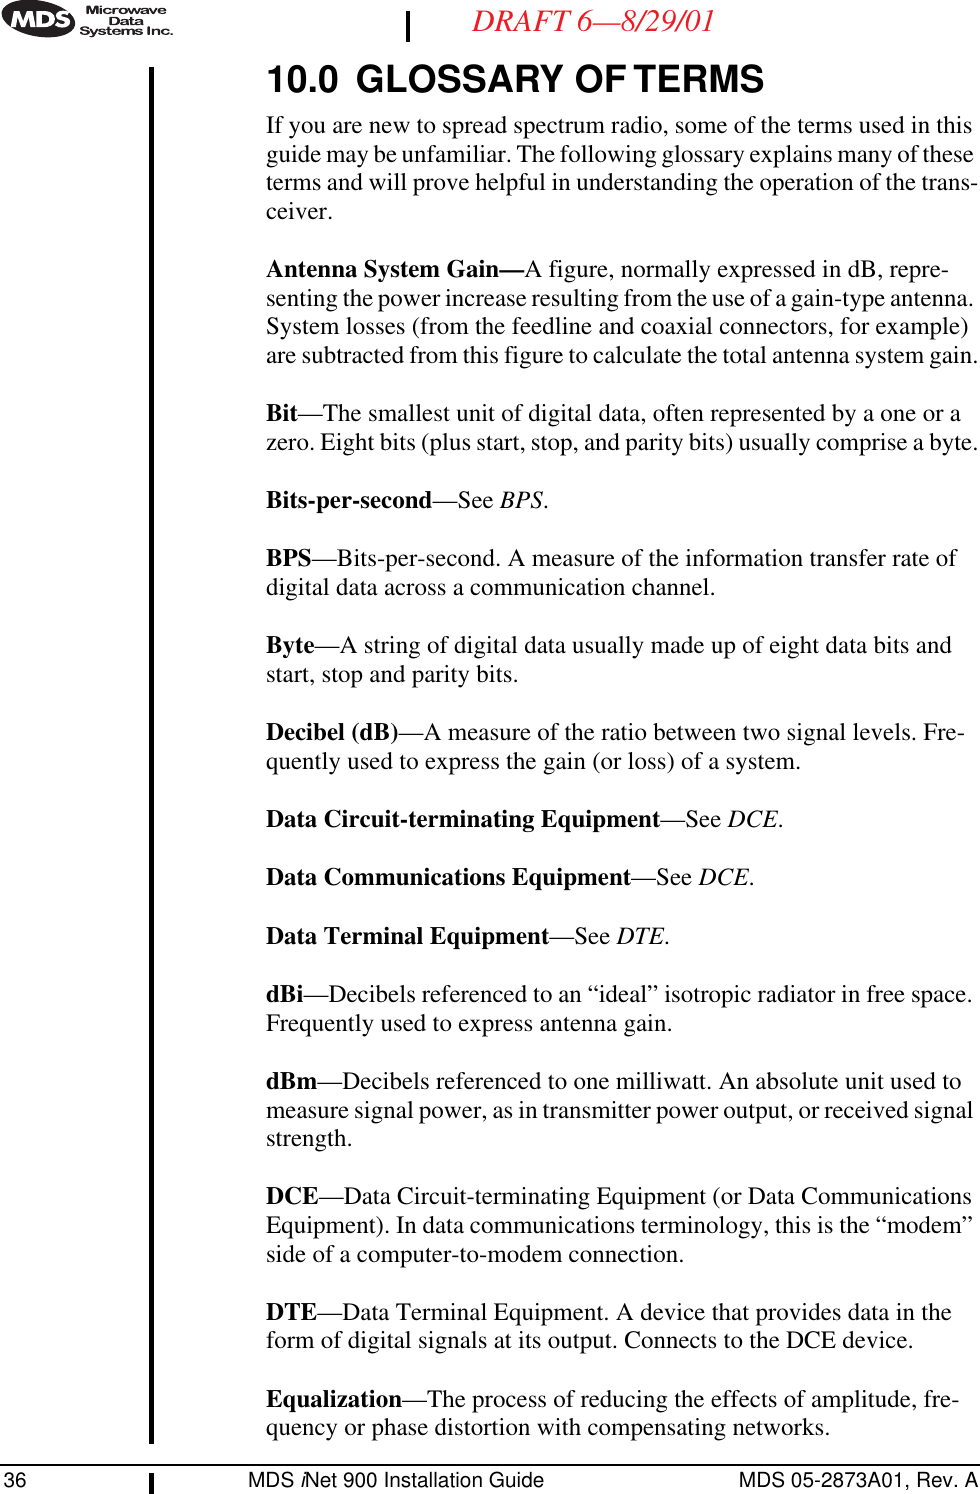 36 MDS iNet 900 Installation Guide MDS 05-2873A01, Rev. ADRAFT 6—8/29/0110.0 GLOSSARY OF TERMSIf you are new to spread spectrum radio, some of the terms used in this guide may be unfamiliar. The following glossary explains many of these terms and will prove helpful in understanding the operation of the trans-ceiver.Antenna System Gain—A figure, normally expressed in dB, repre-senting the power increase resulting from the use of a gain-type antenna. System losses (from the feedline and coaxial connectors, for example) are subtracted from this figure to calculate the total antenna system gain.Bit—The smallest unit of digital data, often represented by a one or a zero. Eight bits (plus start, stop, and parity bits) usually comprise a byte.Bits-per-second—See BPS.BPS—Bits-per-second. A measure of the information transfer rate of digital data across a communication channel.Byte—A string of digital data usually made up of eight data bits and start, stop and parity bits.Decibel (dB)—A measure of the ratio between two signal levels. Fre-quently used to express the gain (or loss) of a system.Data Circuit-terminating Equipment—See DCE.Data Communications Equipment—See DCE.Data Terminal Equipment—See DTE.dBi—Decibels referenced to an “ideal” isotropic radiator in free space. Frequently used to express antenna gain.dBm—Decibels referenced to one milliwatt. An absolute unit used to measure signal power, as in transmitter power output, or received signal strength.DCE—Data Circuit-terminating Equipment (or Data Communications Equipment). In data communications terminology, this is the “modem” side of a computer-to-modem connection.DTE—Data Terminal Equipment. A device that provides data in the form of digital signals at its output. Connects to the DCE device.Equalization—The process of reducing the effects of amplitude, fre-quency or phase distortion with compensating networks.